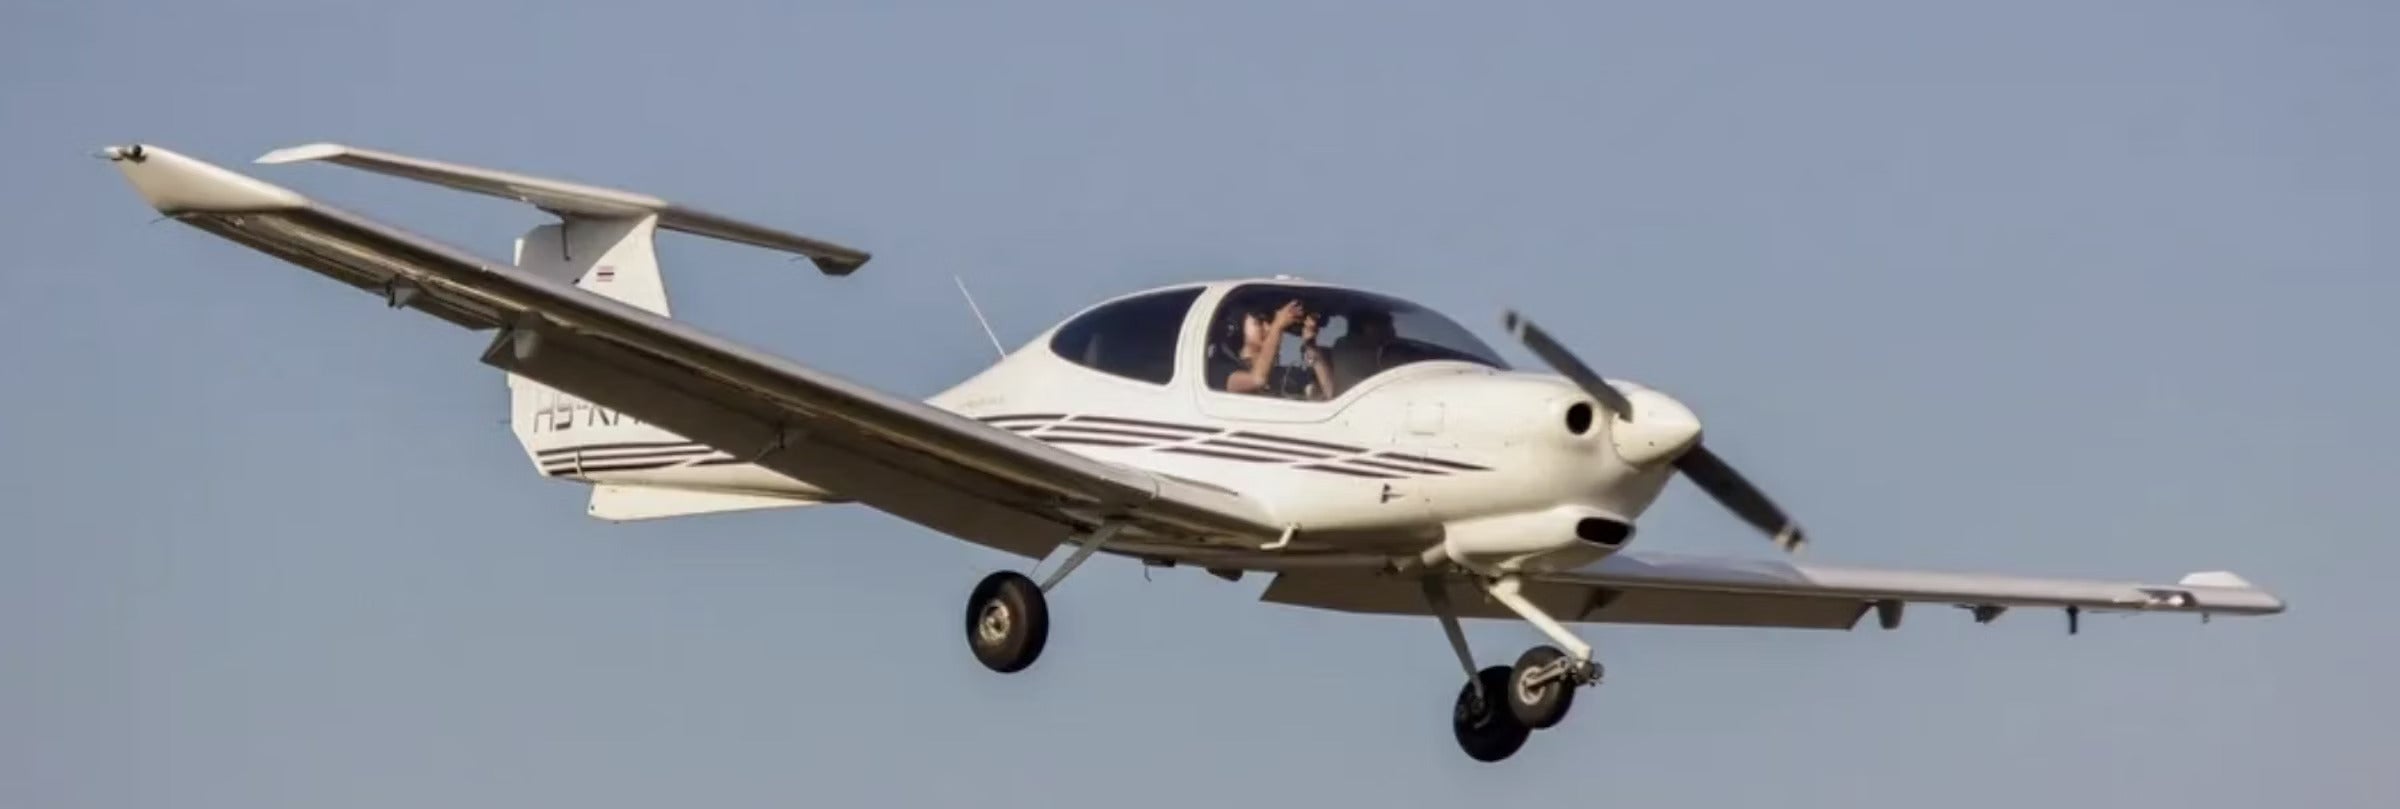 2005 Diamond DA40 F Is a Well-Rounded ‘Aircraft For Sale’ Top Pick